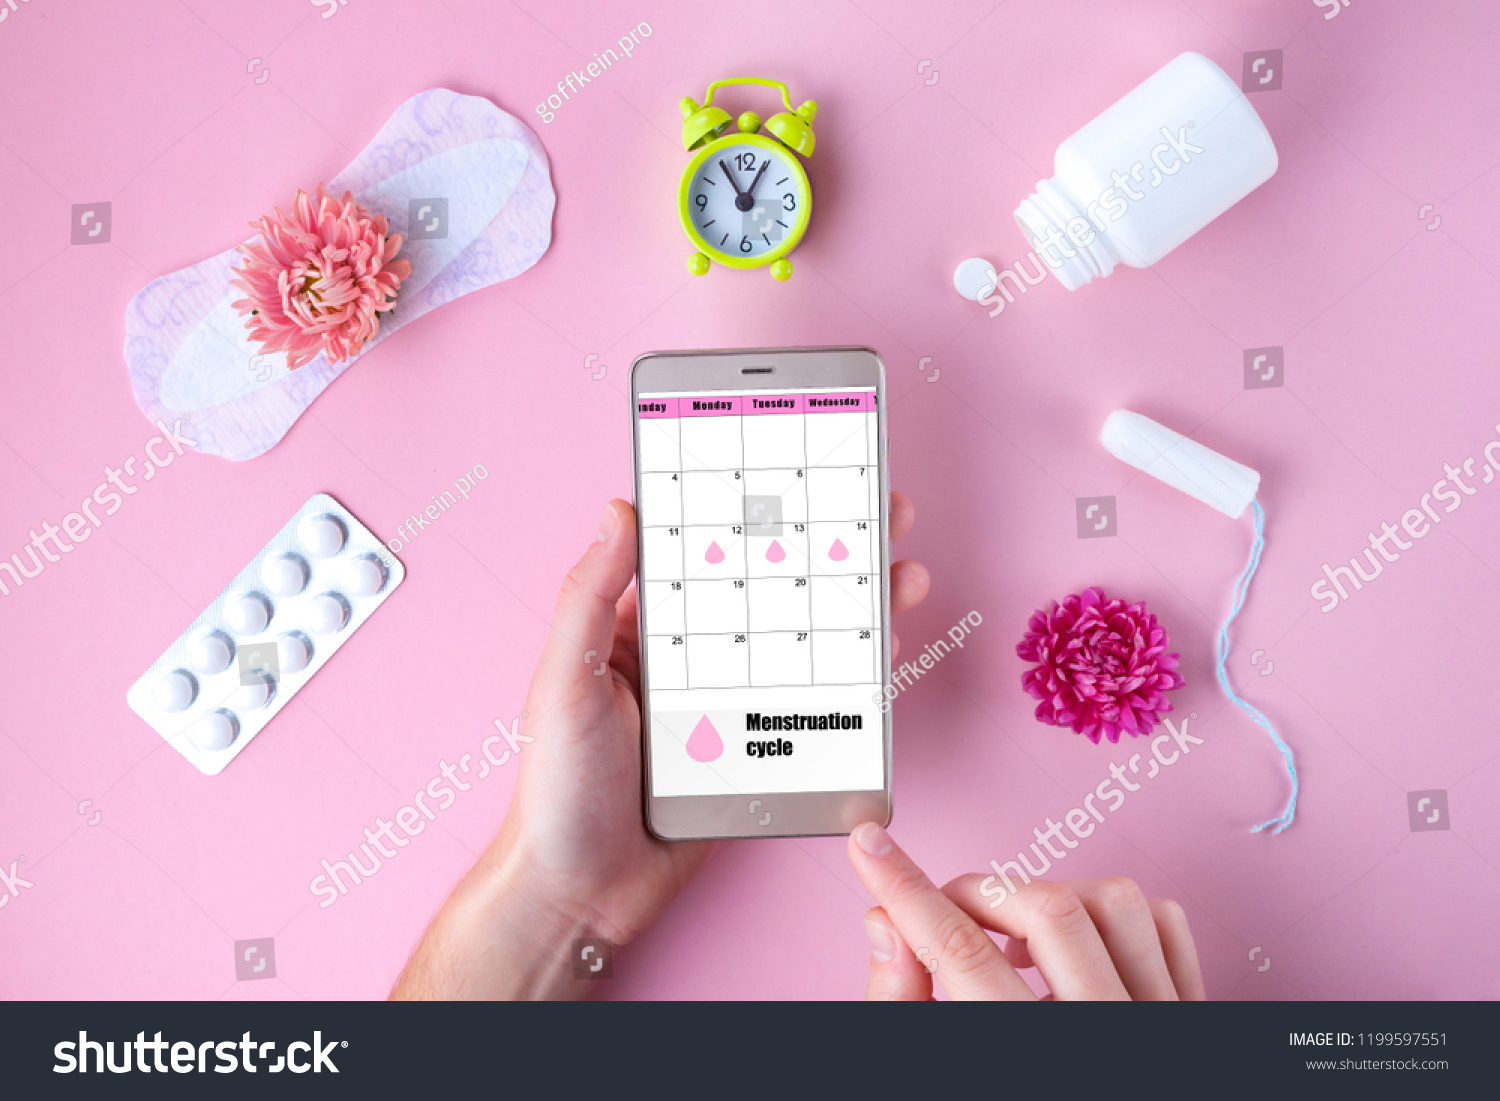 Tampon, feminine, sanitary pads for critical days, feminine calendar, alarm clock, pain pills during menstruation and a pink flower on a pink background. Care of hygiene during menstruation.  #1199597551